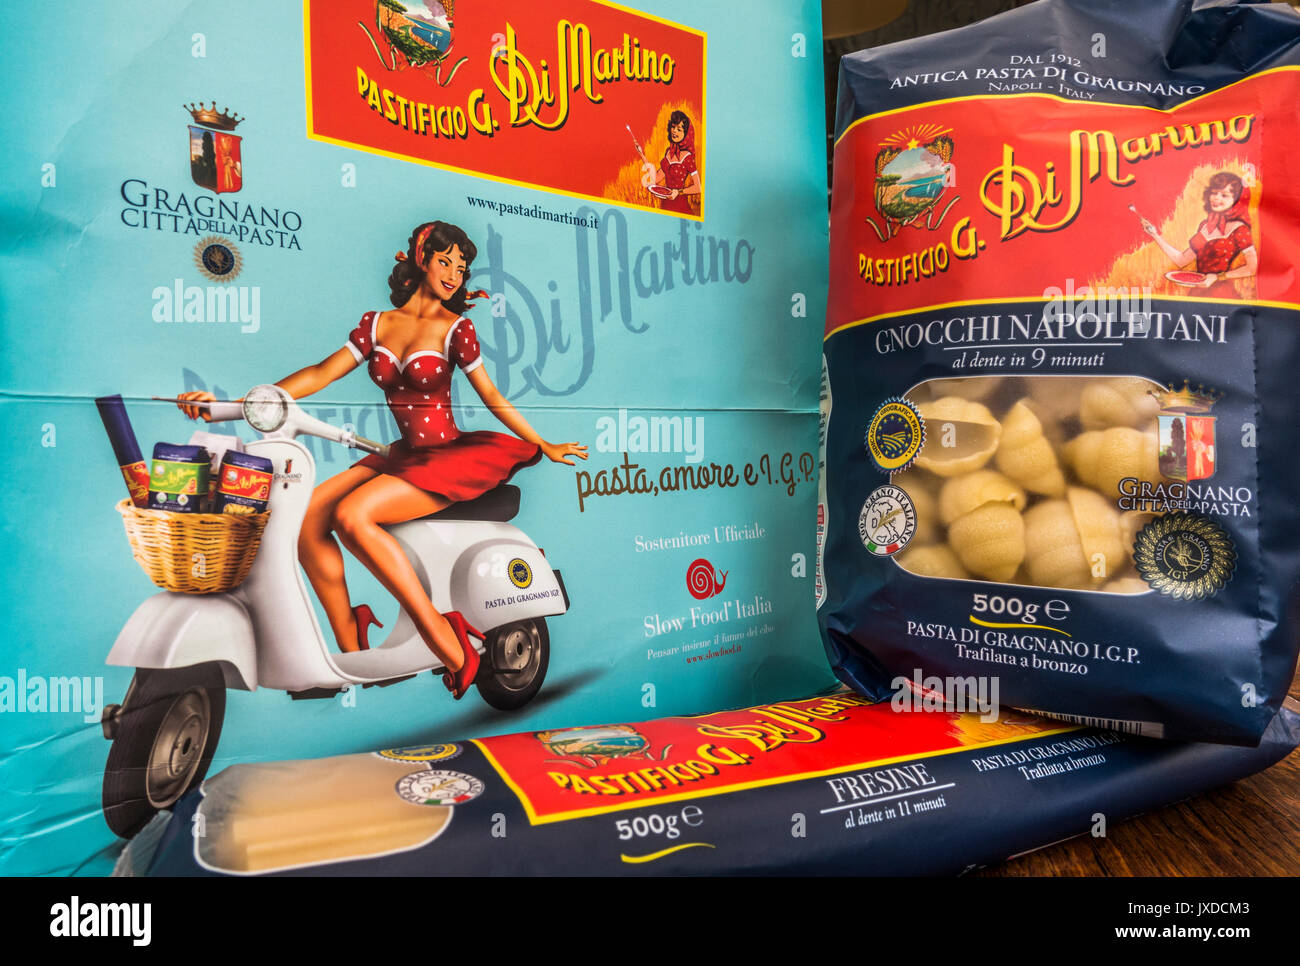 Combined Pasta di Martino products - dry spaghetti and shells in separate packs, against a presentation box showing a girl on an Italian make scooter. Stock Photo